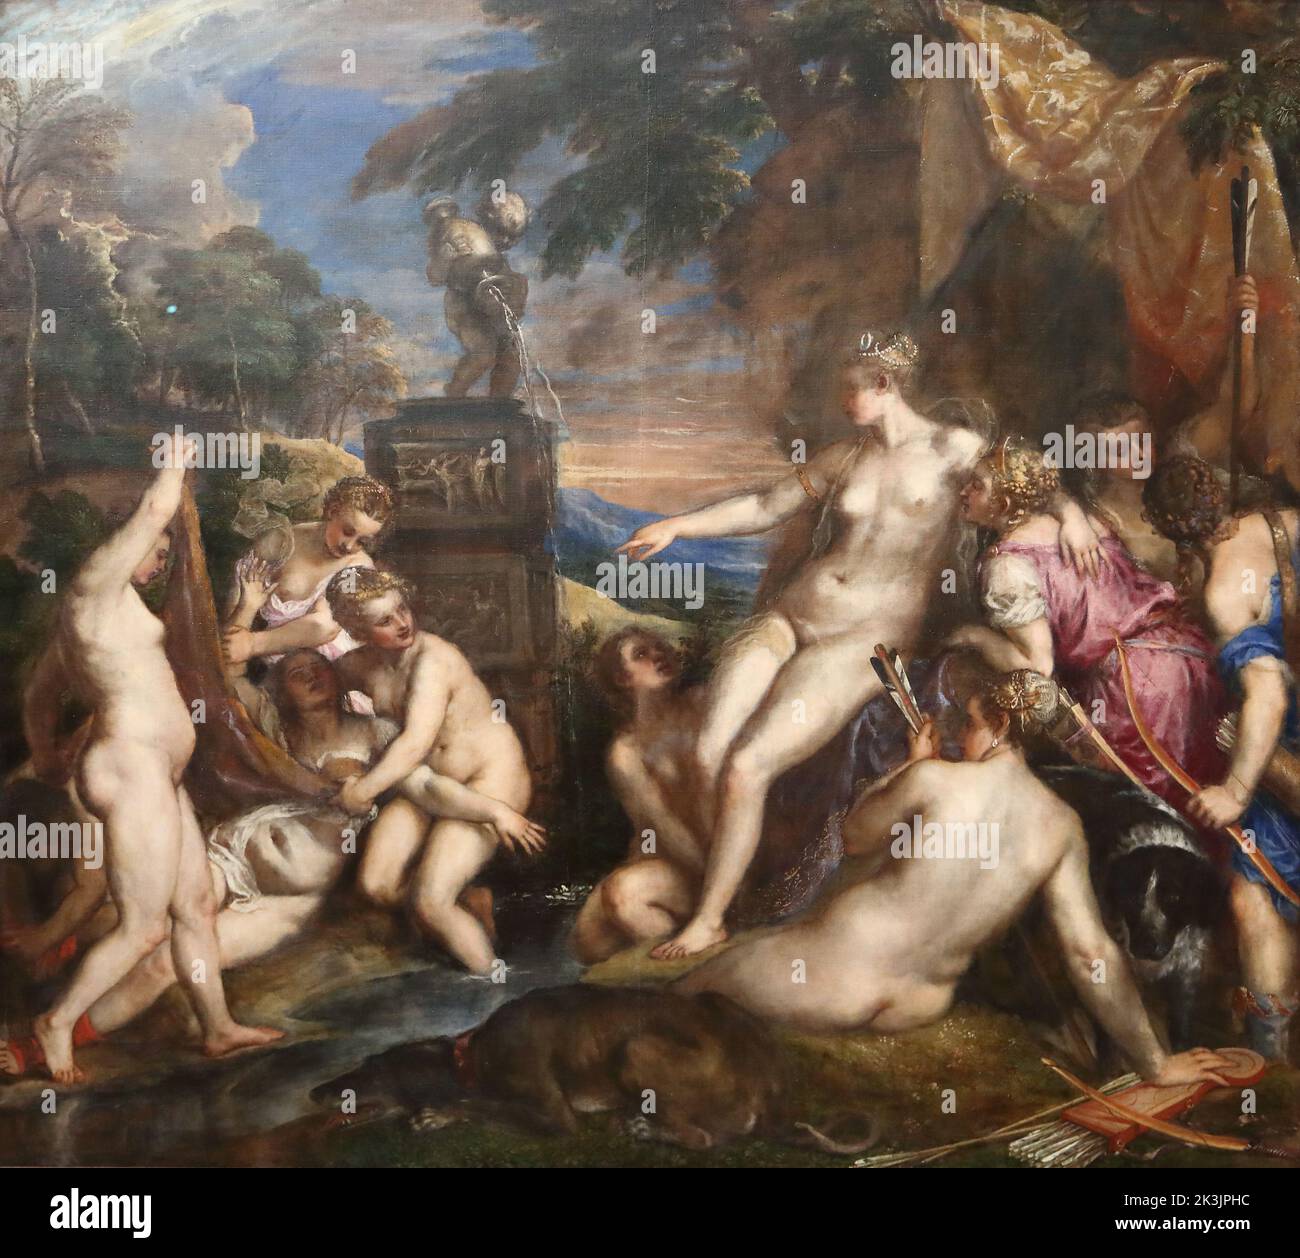 Diana and Callisto by Italian Renaissance painter Titian at the National Gallery, London, UK Stock Photo